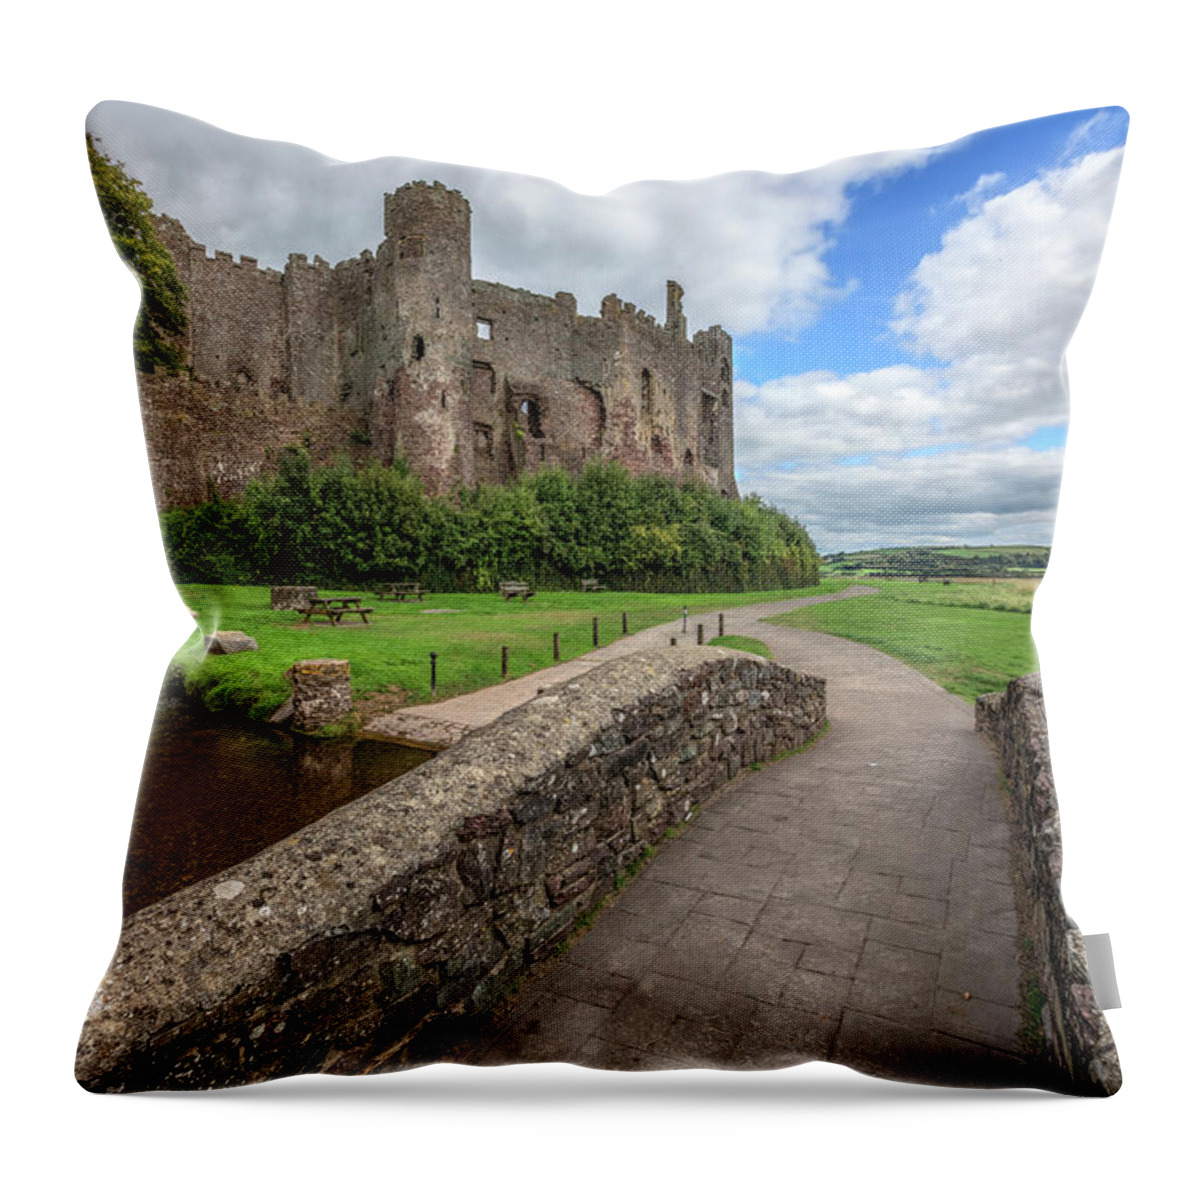 Laugharne Castle Throw Pillow featuring the photograph Laugharne Castle - Wales by Joana Kruse